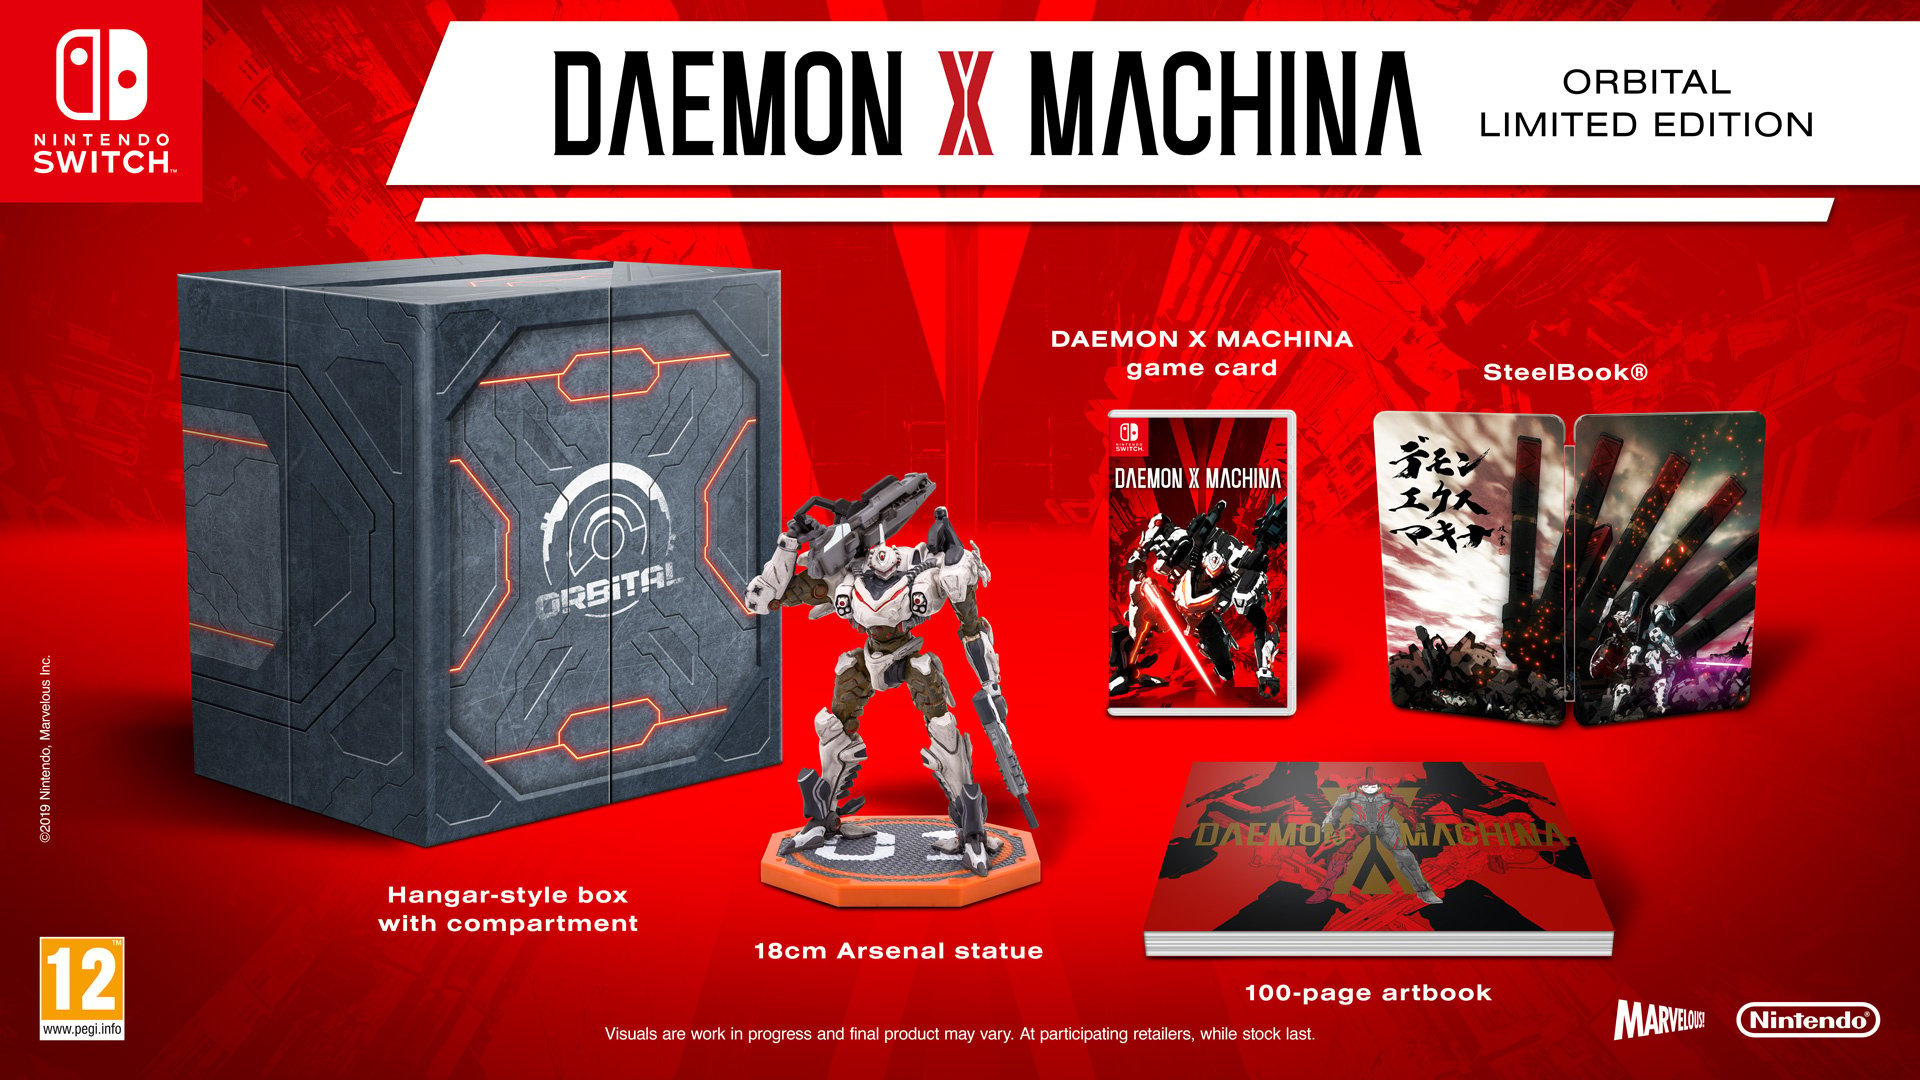 Daemon X Machina S Orbital Limited Edition Comes With A Statue Steelbook And More Nintendo Life